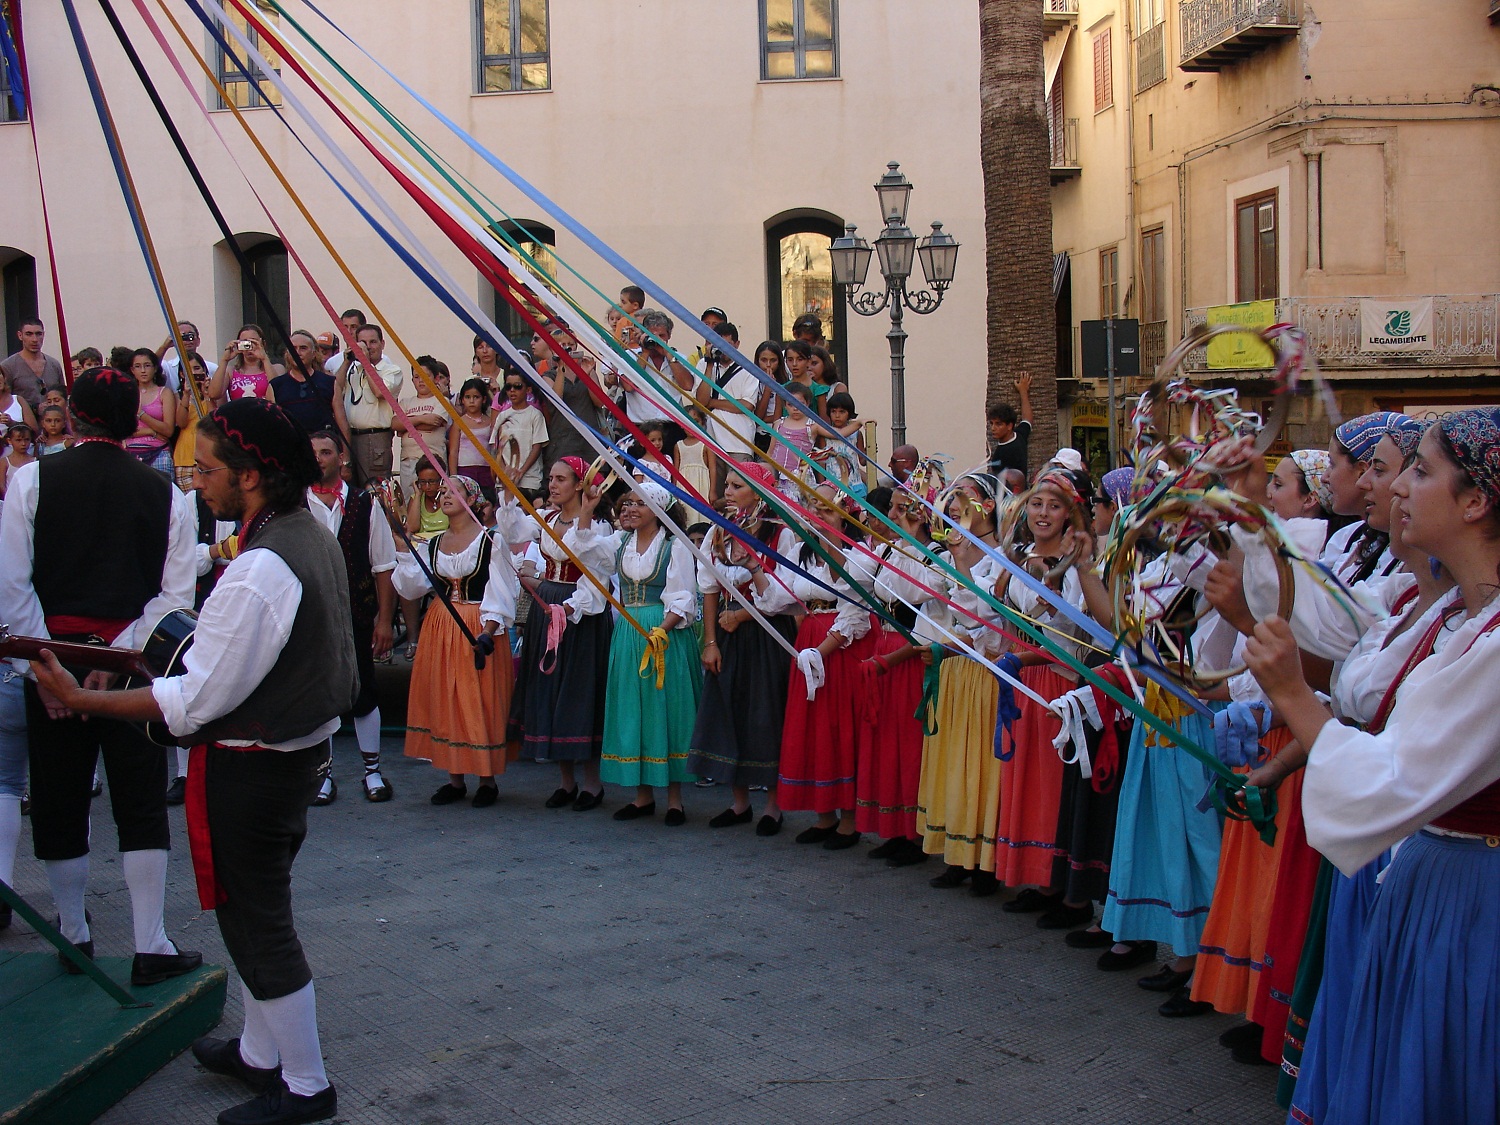 8.Theatres, “Opera dei Pupi”, Folklore and Medieval and Religious Performances.